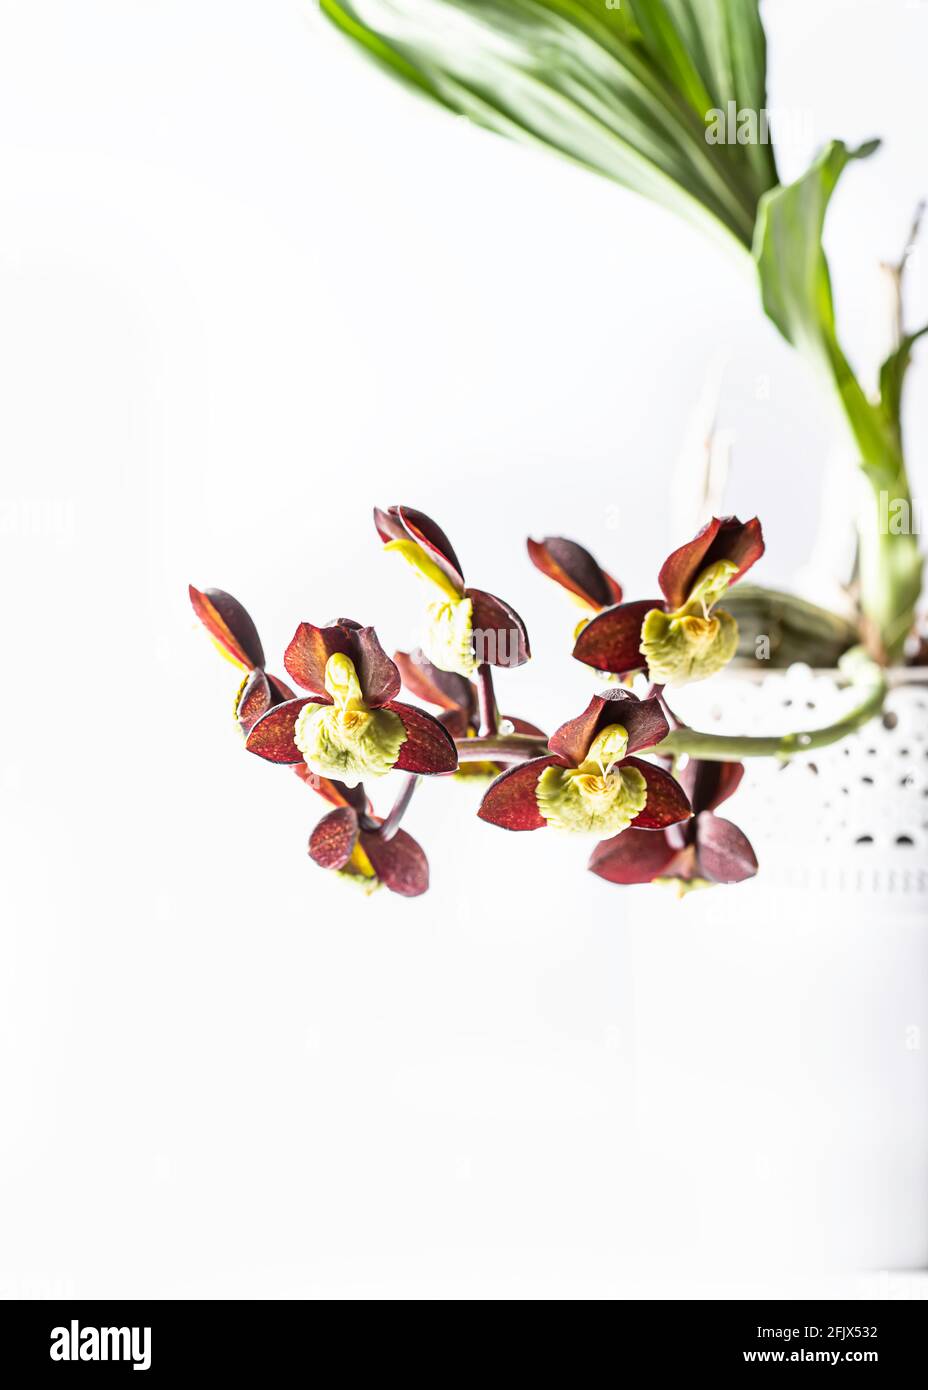 Orchid. Catasetum hybrid on white background. Catasetum tenebrosum. A photo of a stunning almost black orchid hybrid. Selective focus Stock Photo